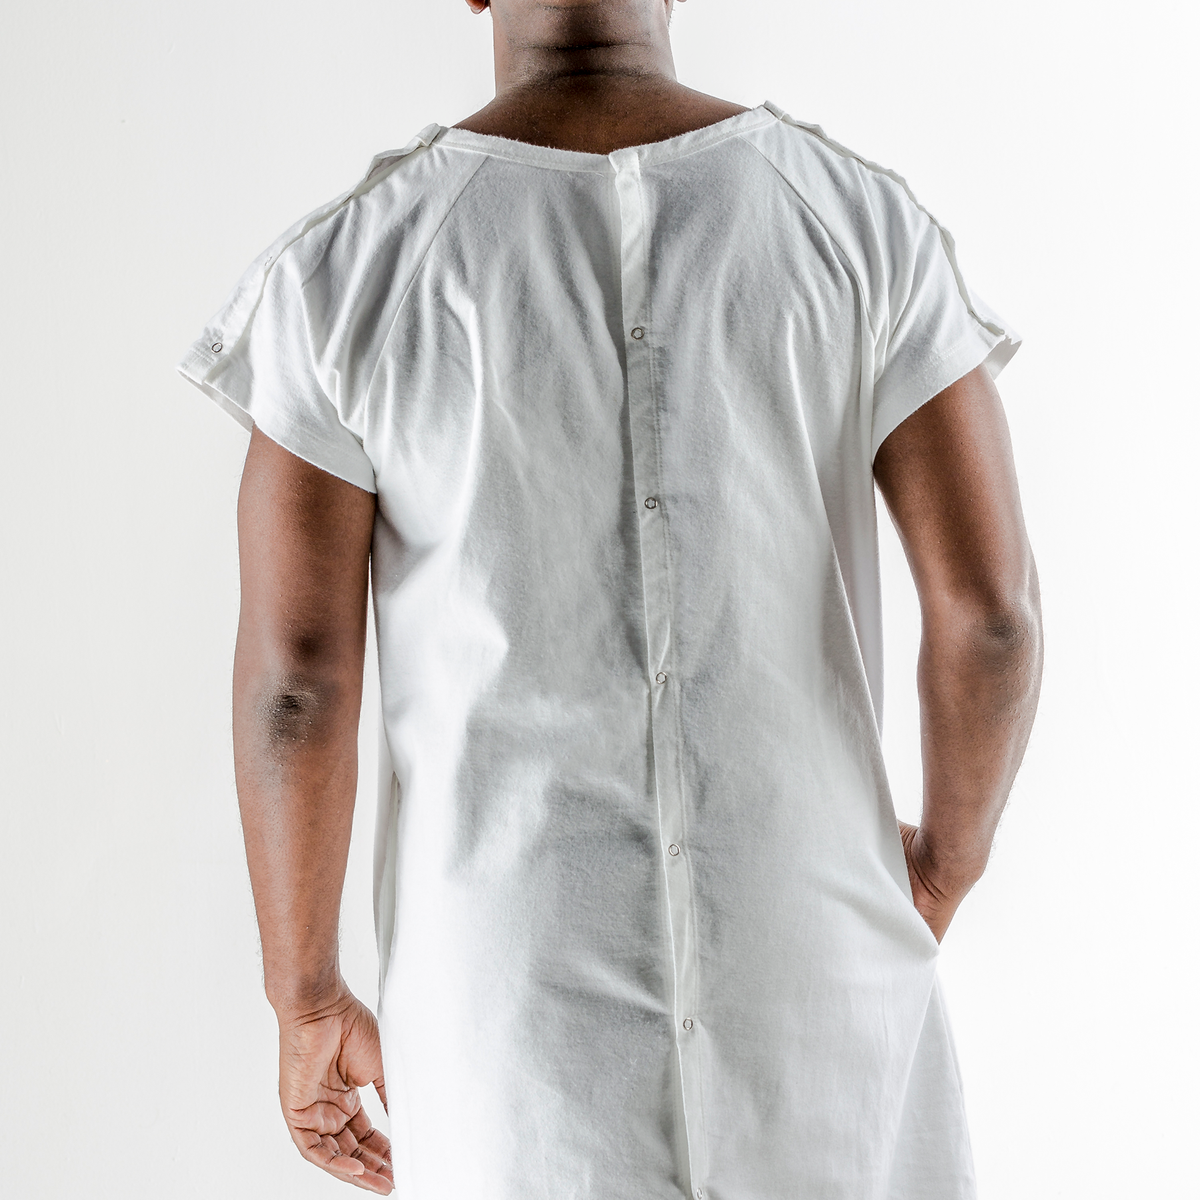 Back of hospital gown showing snaps